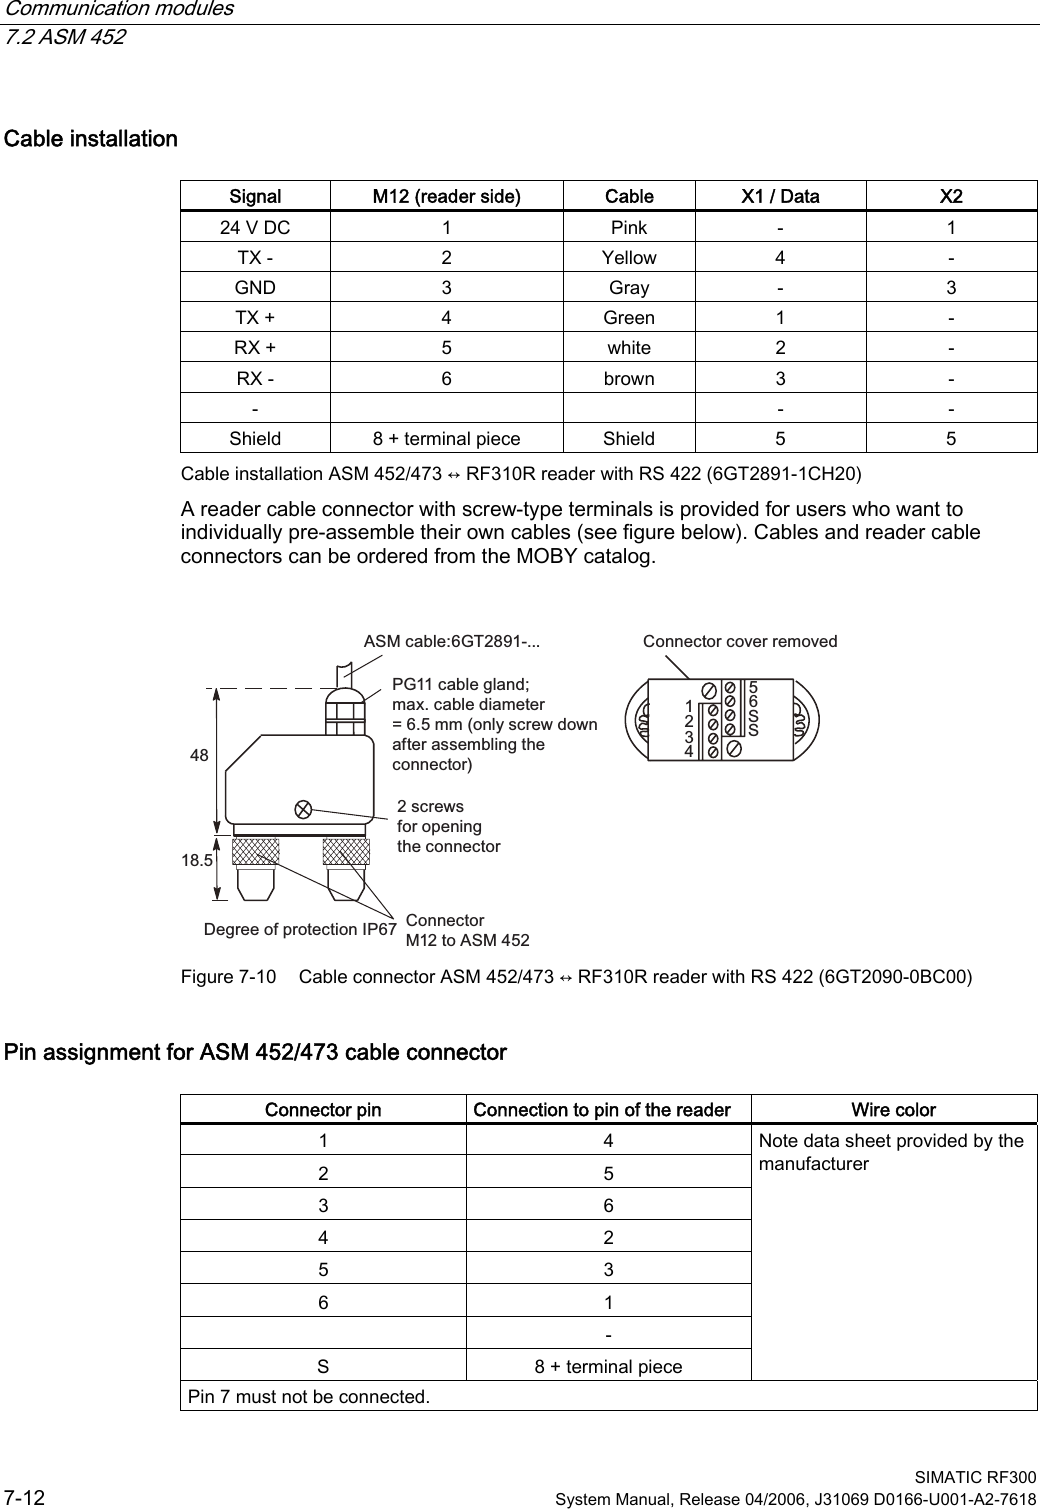 Communication modules 7.2 ASM 452  SIMATIC RF300 7-12  System Manual, Release 04/2006, J31069 D0166-U001-A2-7618 Cable installation  Signal  M12 (reader side)  Cable  X1 / Data  X2 24 V DC  1  Pink  -  1 TX -  2  Yellow  4  - GND  3  Gray  -  3 TX +  4  Green  1  - RX +  5  white  2  - RX -  6  brown  3  - -      -  - Shield  8 + terminal piece  Shield  5  5 Cable installation ASM 452/473 ↔ RF310R reader with RS 422 (6GT2891-1CH20)  A reader cable connector with screw-type terminals is provided for users who want to individually pre-assemble their own cables (see figure below). Cables and reader cable connectors can be ordered from the MOBY catalog.  66VFUHZVIRURSHQLQJWKHFRQQHFWRU&amp;RQQHFWRU0WR$60&apos;HJUHHRISURWHFWLRQ,33*FDEOHJODQGPD[FDEOHGLDPHWHU PPRQO\VFUHZGRZQDIWHUDVVHPEOLQJWKHFRQQHFWRU$60FDEOH*7 &amp;RQQHFWRUFRYHUUHPRYHG Figure 7-10  Cable connector ASM 452/473 ↔ RF310R reader with RS 422 (6GT2090-0BC00)  Pin assignment for ASM 452/473 cable connector  Connector pin  Connection to pin of the reader  Wire color 1  4 2  5 3  6 4  2 5  3 6  1  - S  8 + terminal piece Note data sheet provided by the manufacturer Pin 7 must not be connected. 